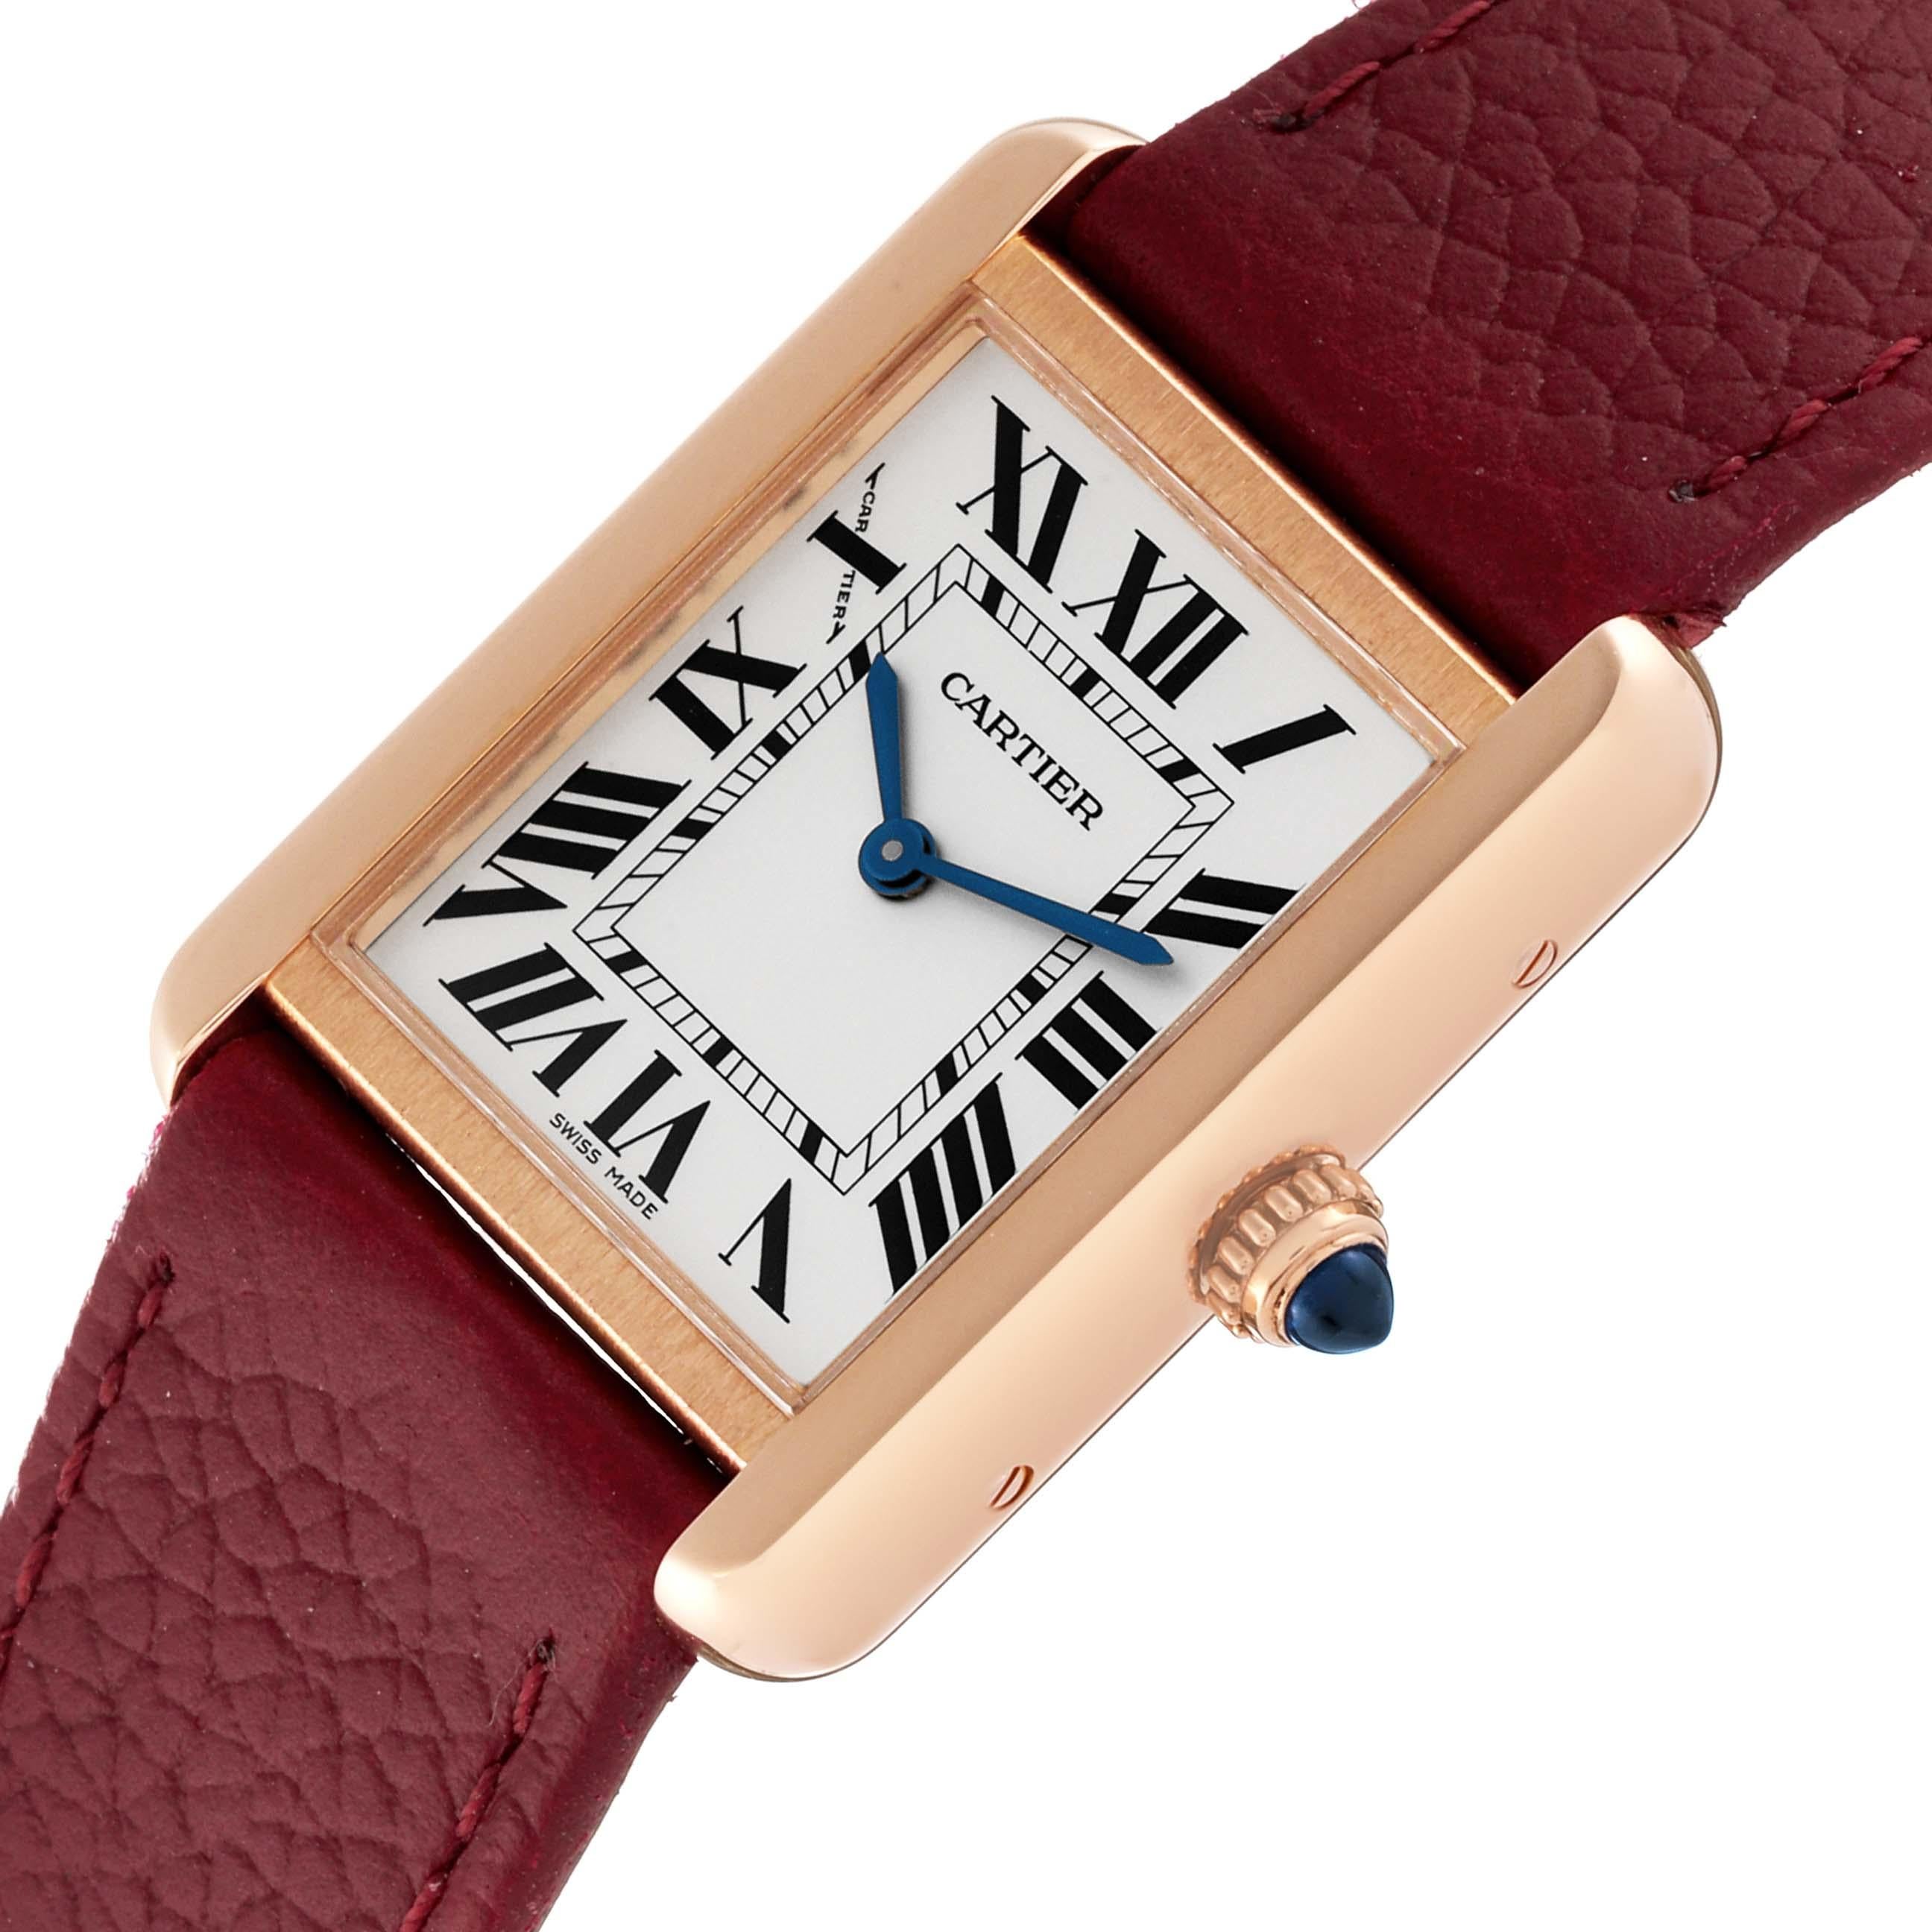 Cartier Tank Solo Silver Dial Rose Gold Steel Ladies Watch W5200024 In Excellent Condition For Sale In Atlanta, GA